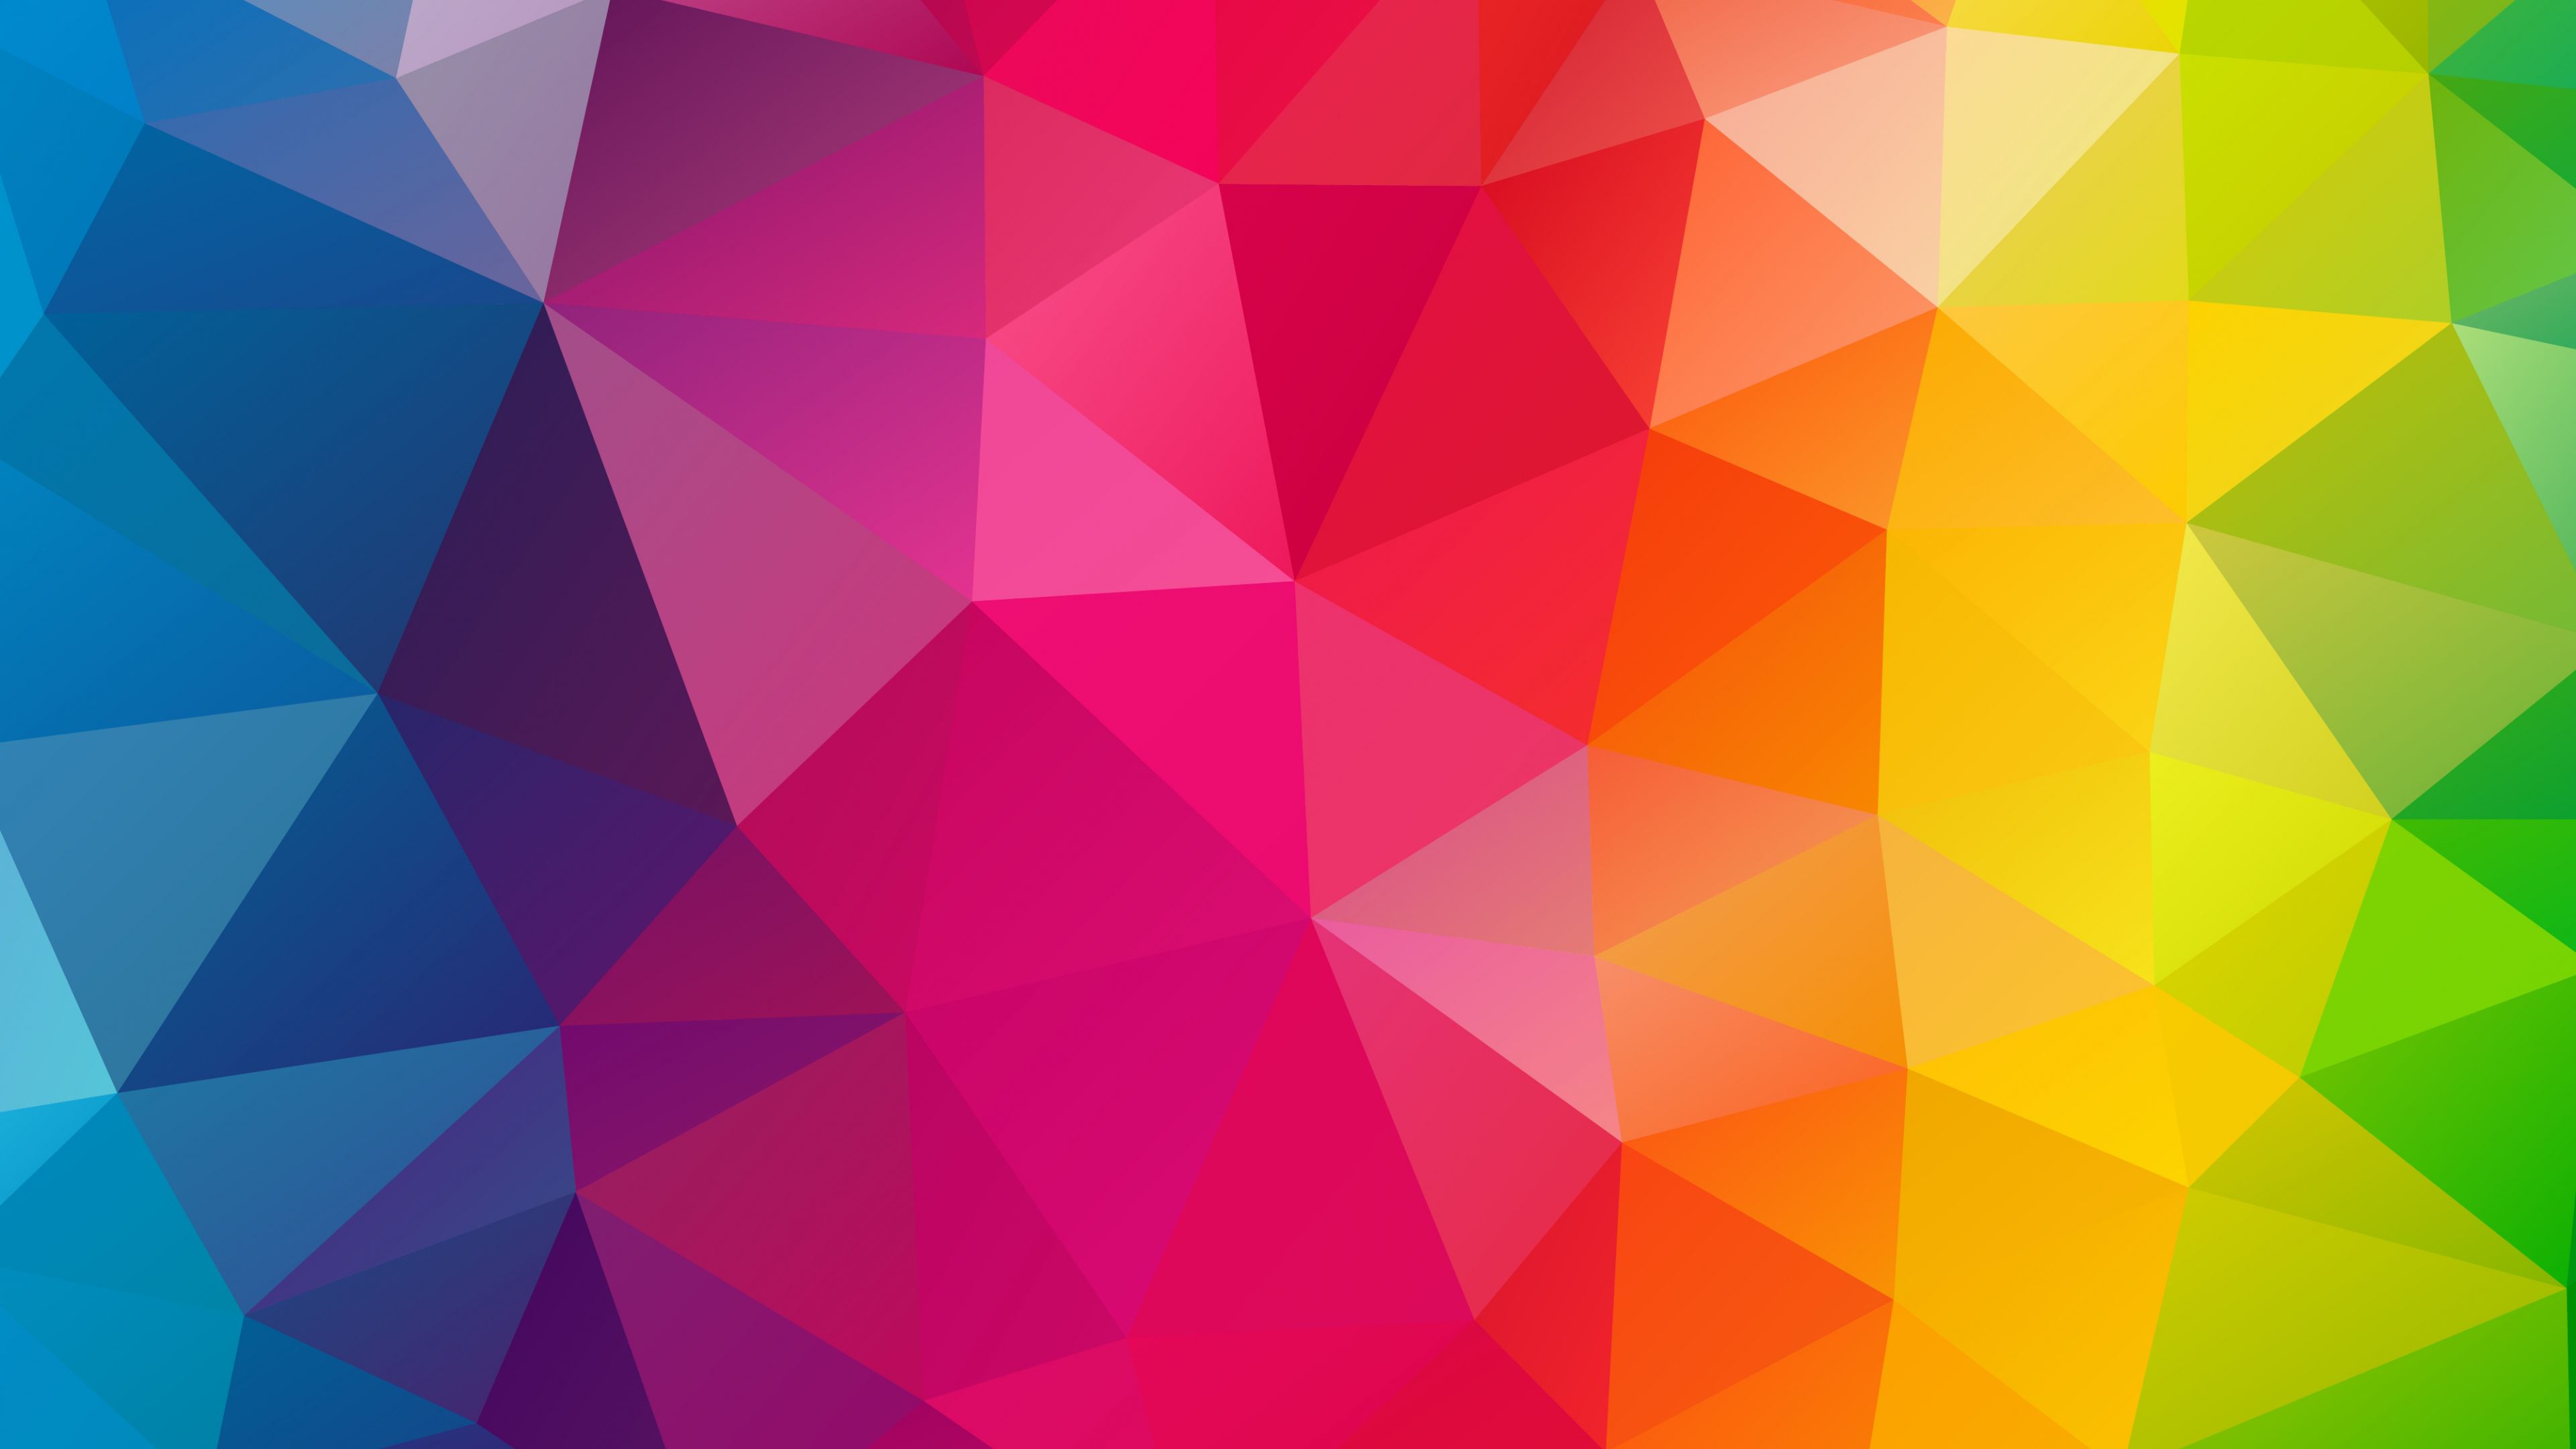 Download 3840x2160 wallpaper colorful shapes, abstract, triangles, 4k, uhd 16: widescreen, 3840x2160 HD image, background, 853